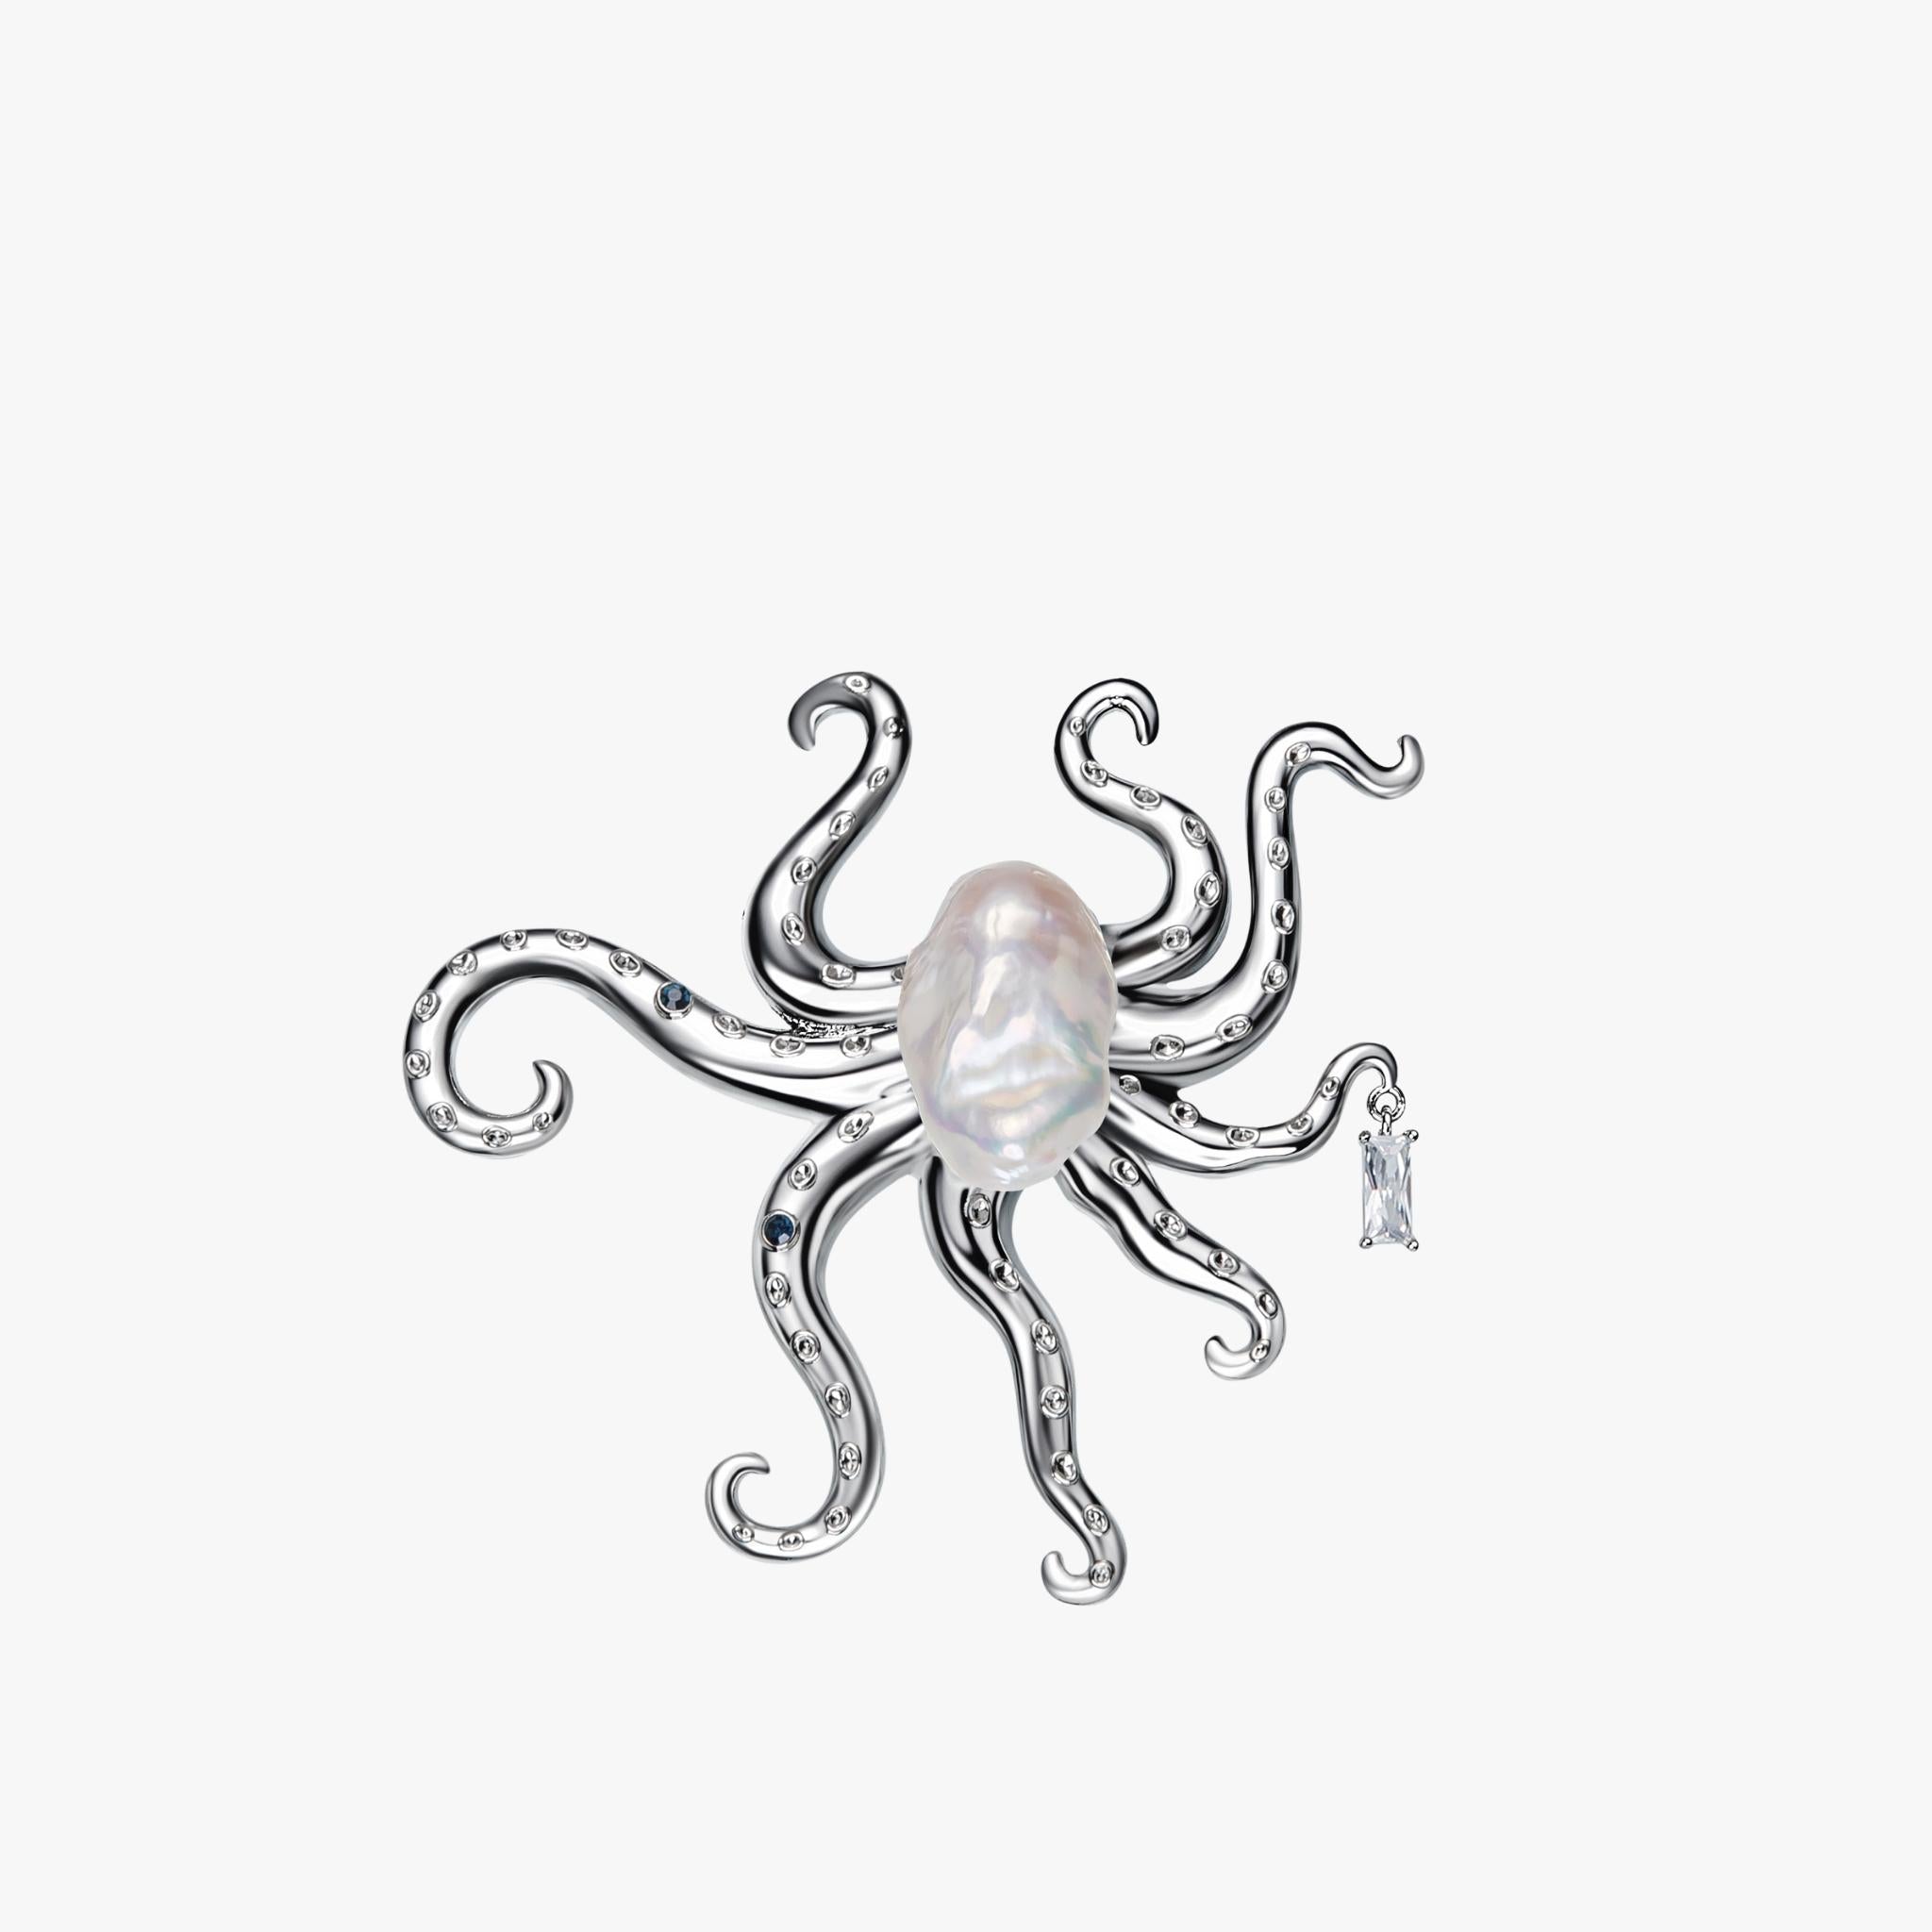 Large Cultured Baroque Pearl Octopus Brooch